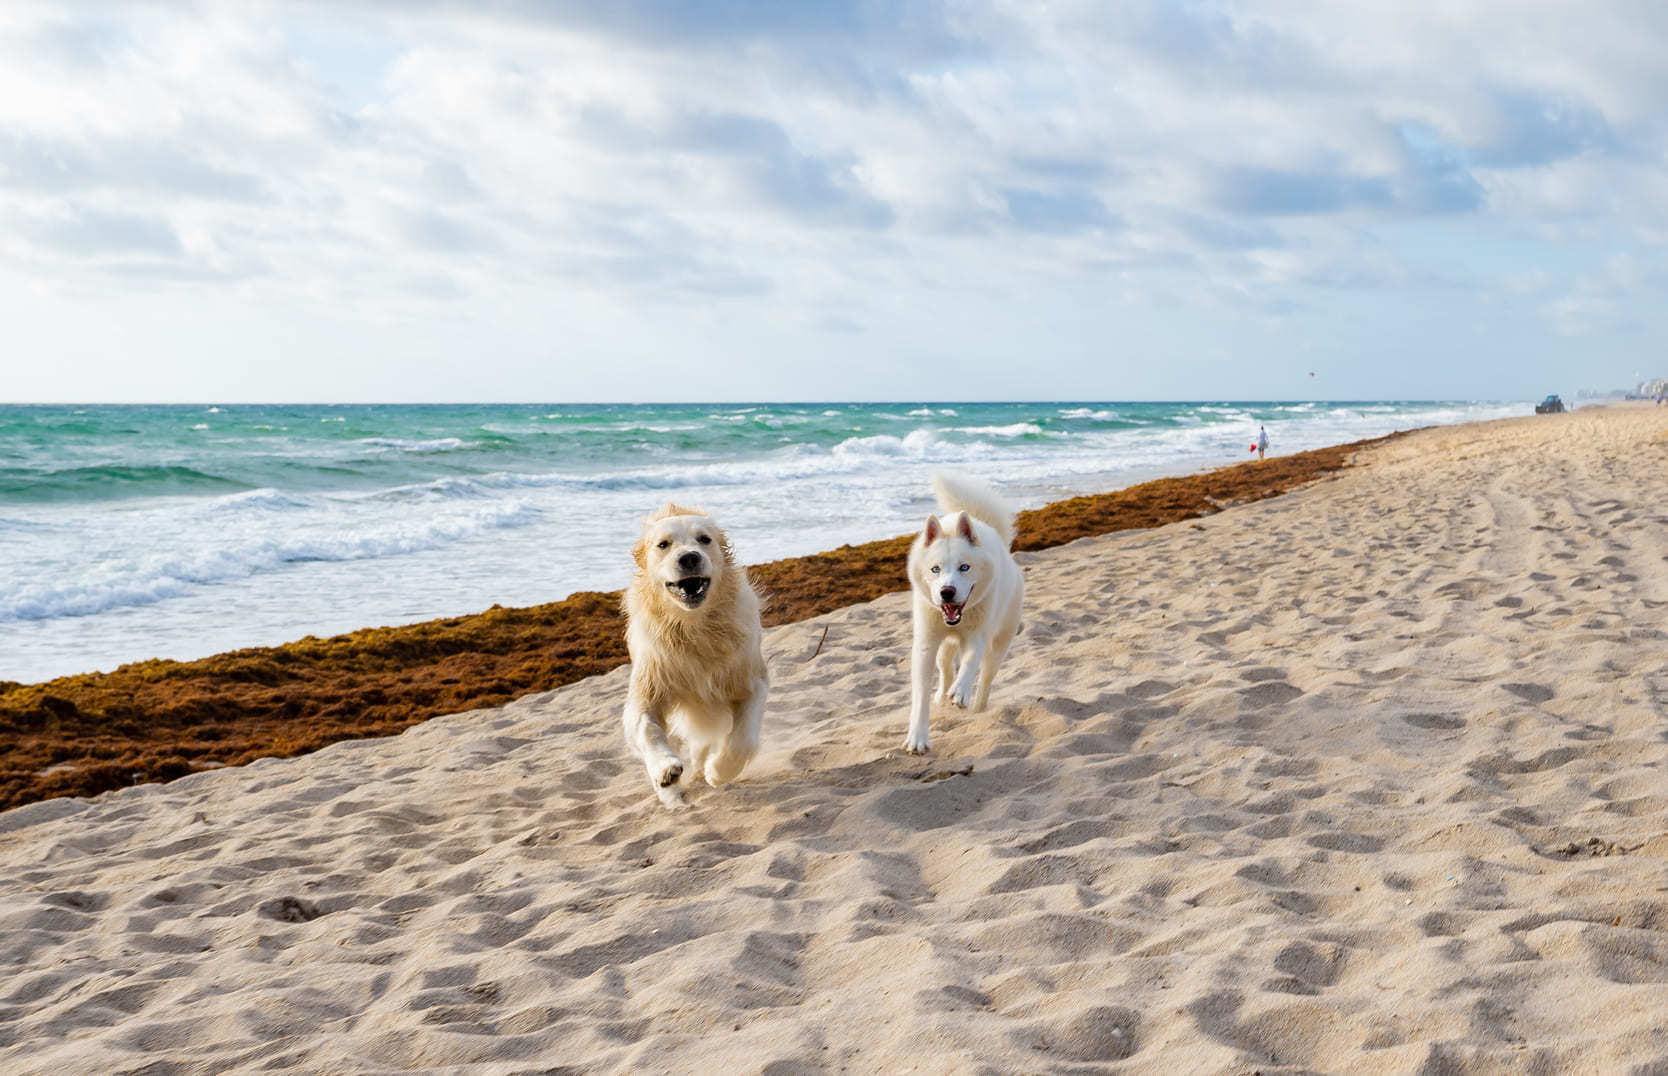 Dogs running on the beach in Florida